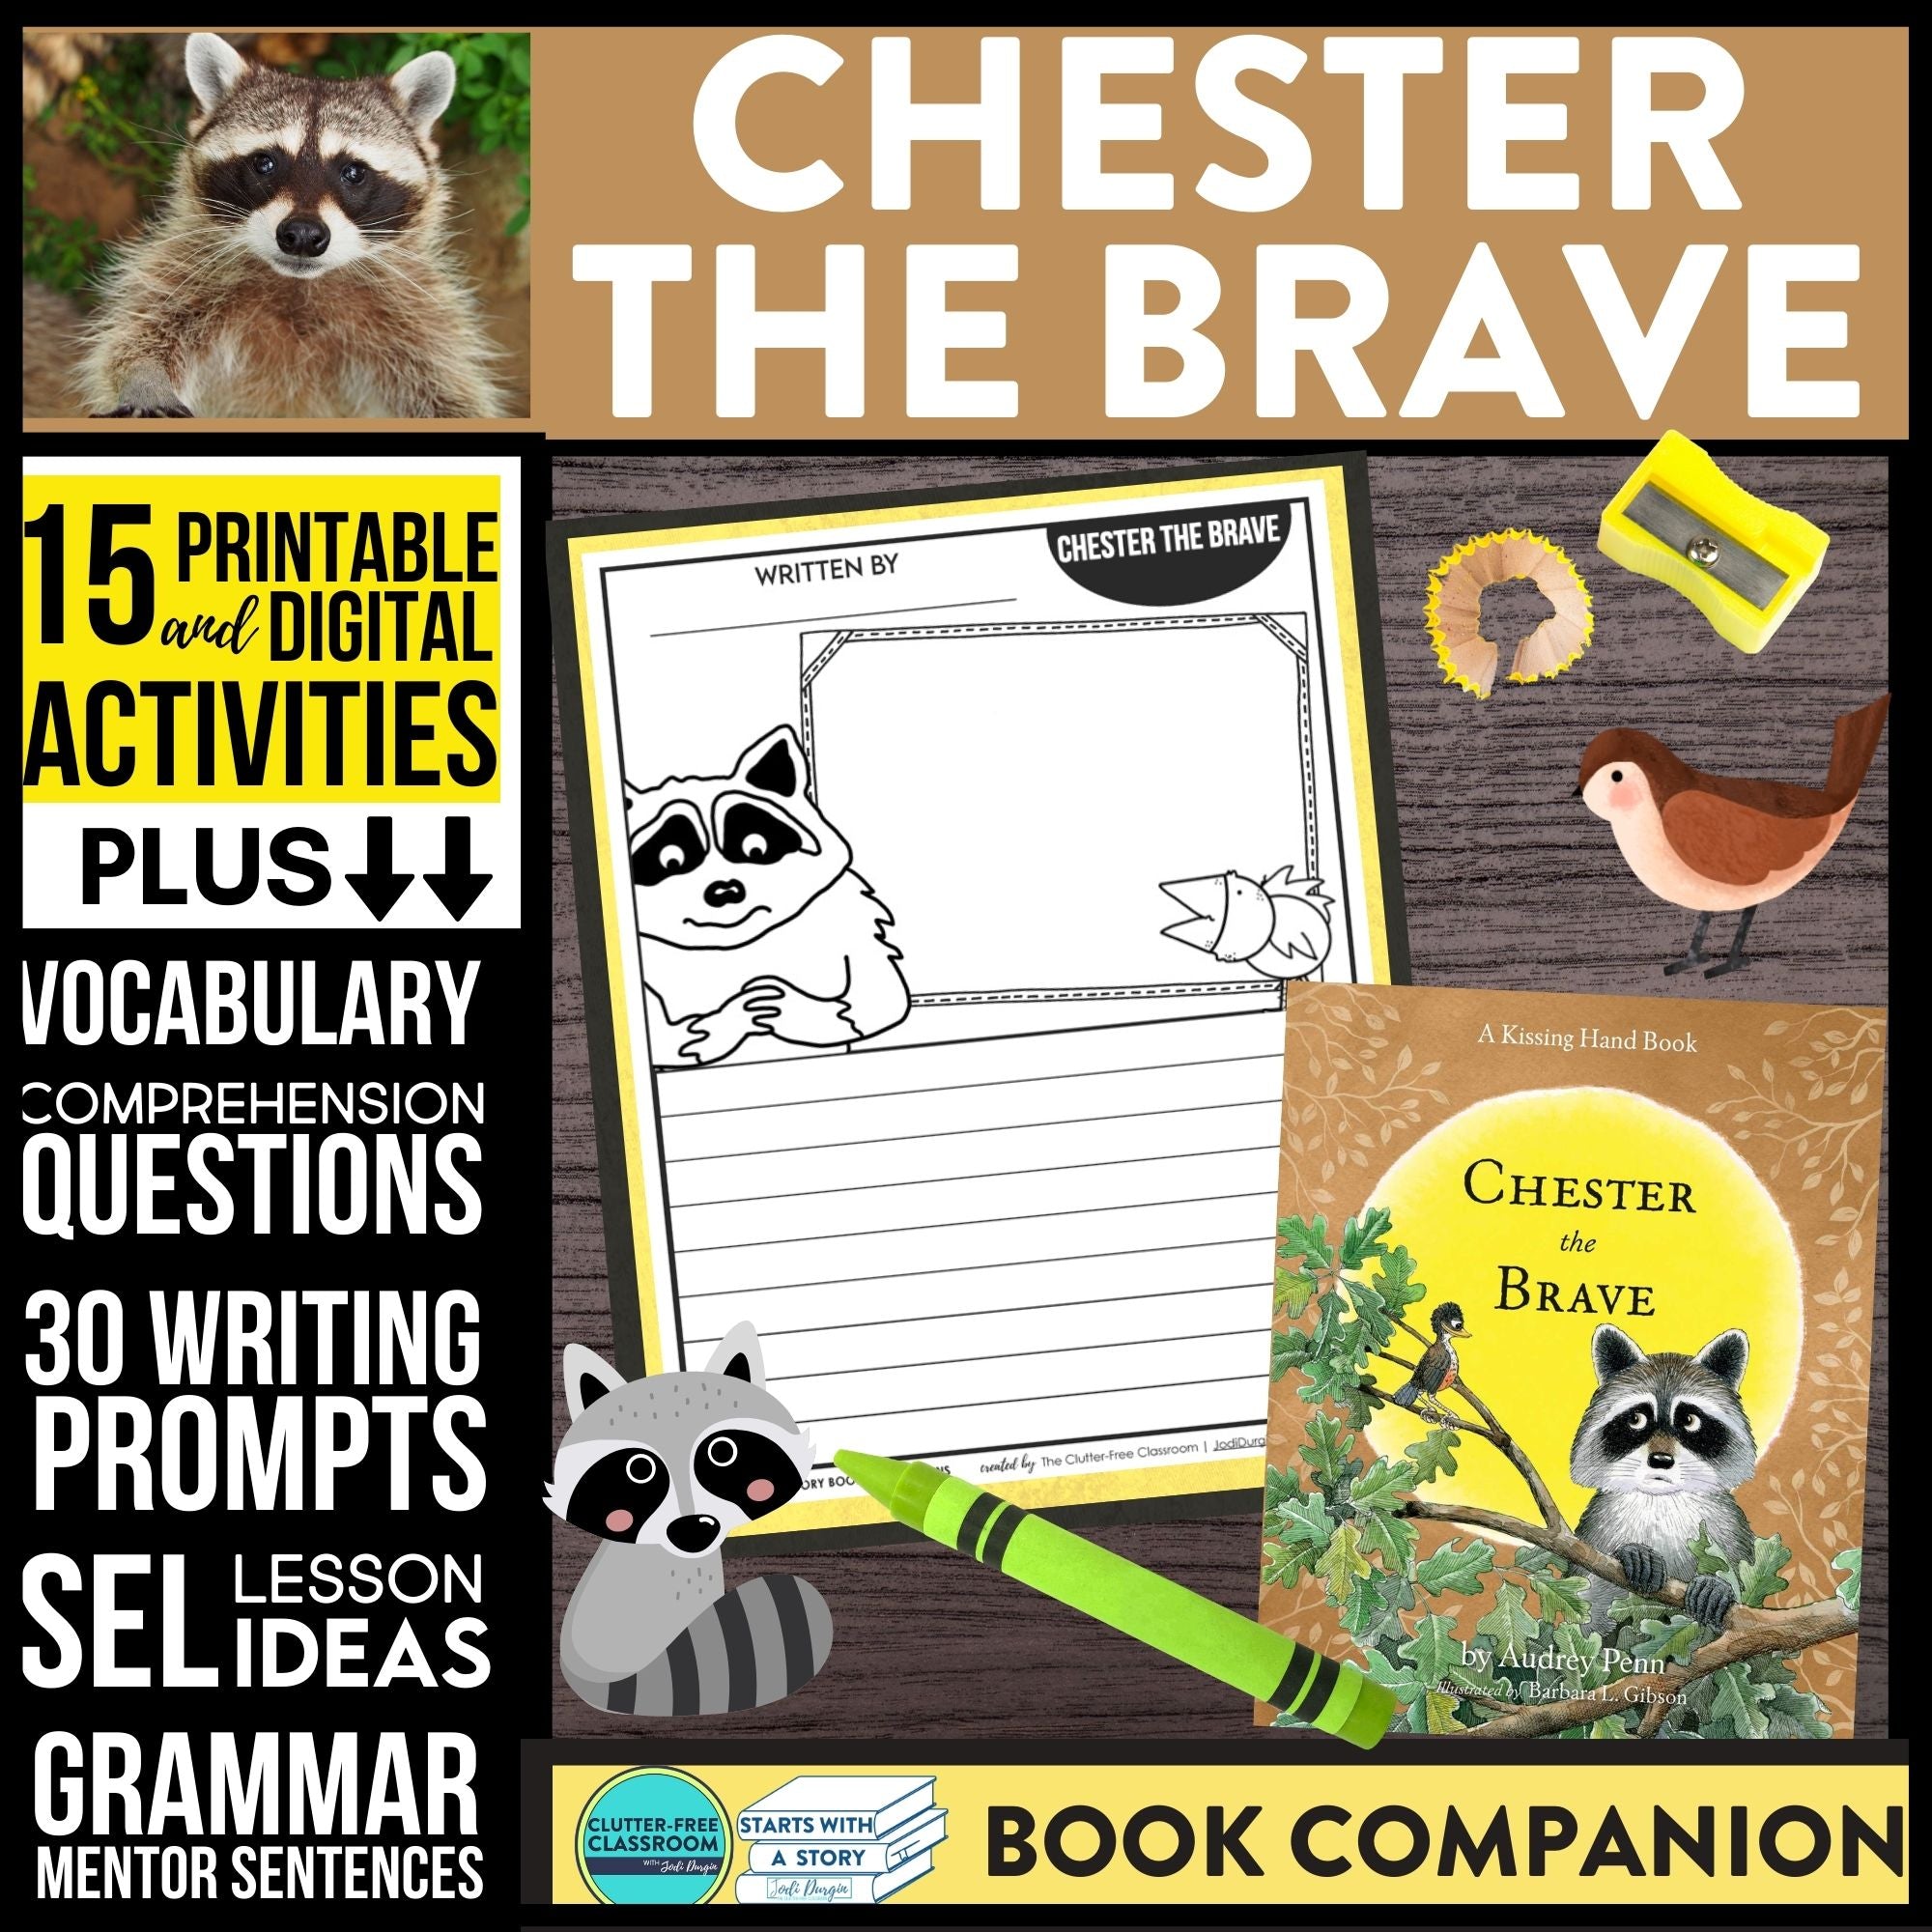 CHESTER THE BRAVE activities and lesson plan ideas